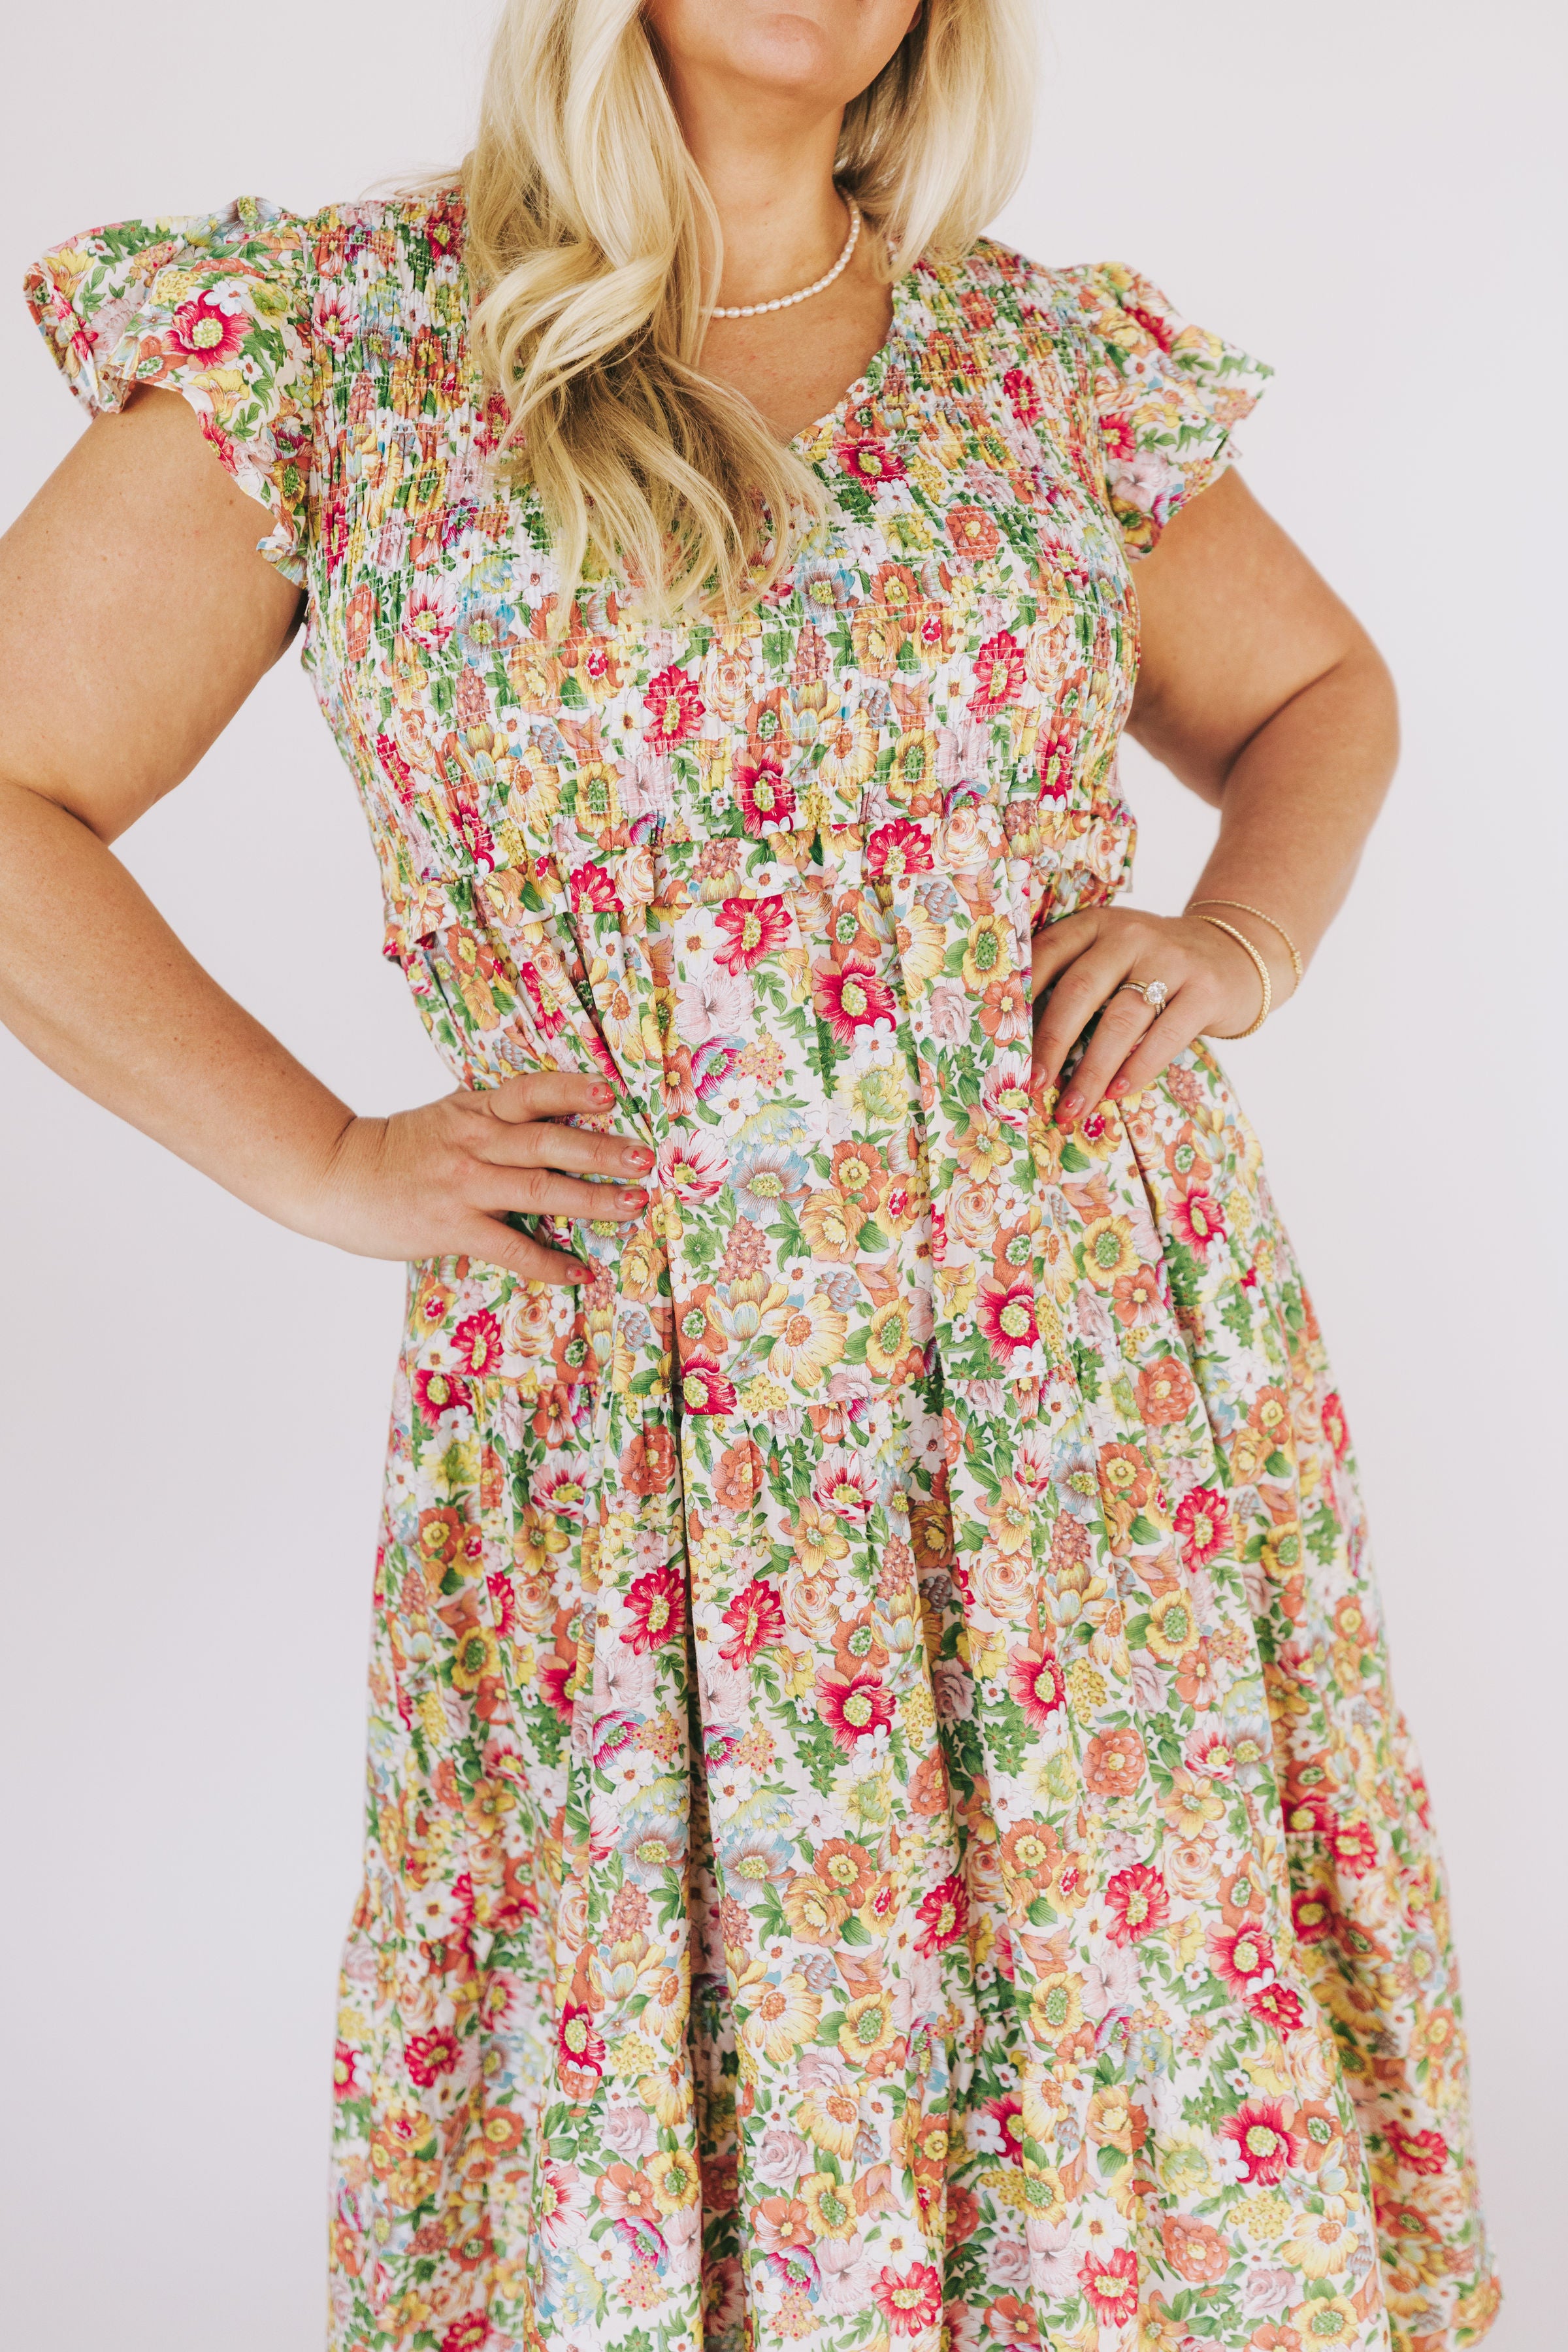 PLUS SIZE - In The Breeze Dress - 2 colors!